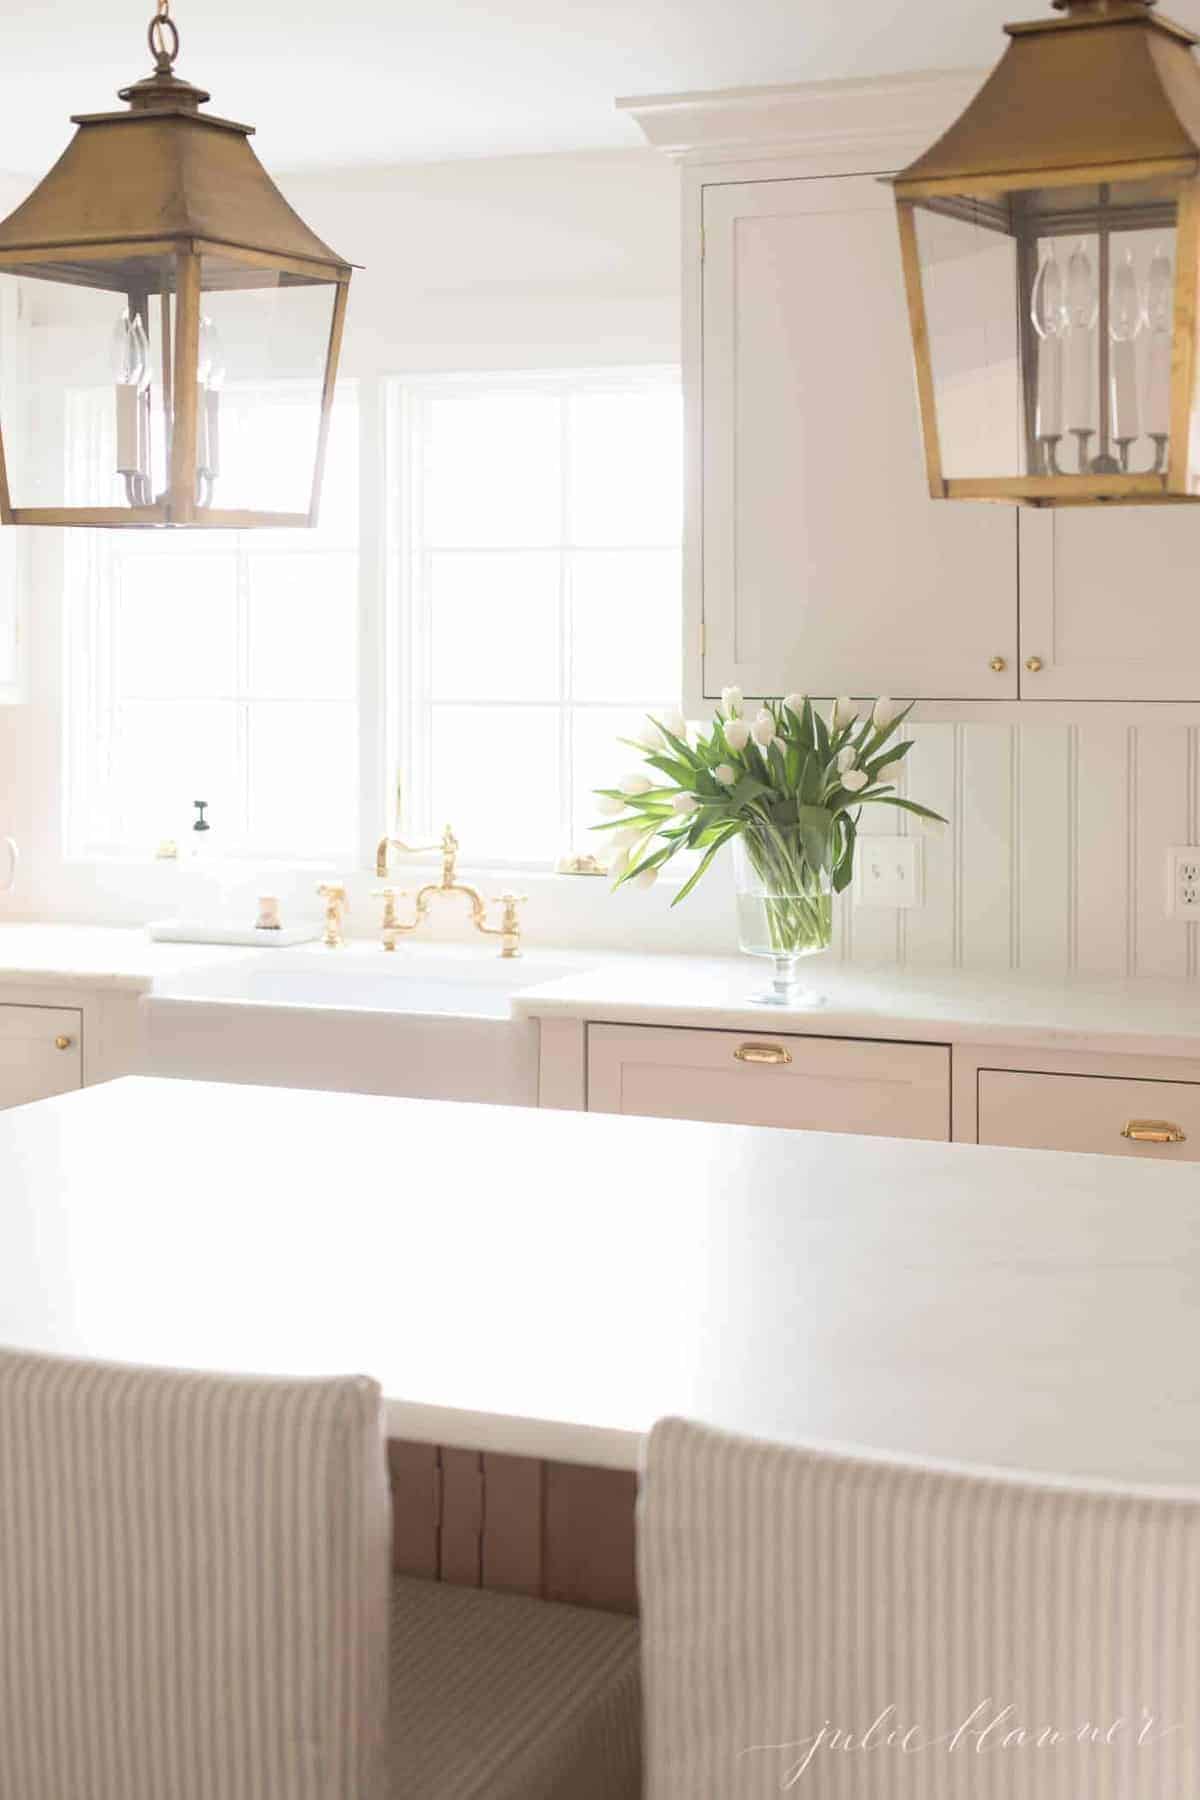 A white kitchen with a simple vase of flowers on the island.